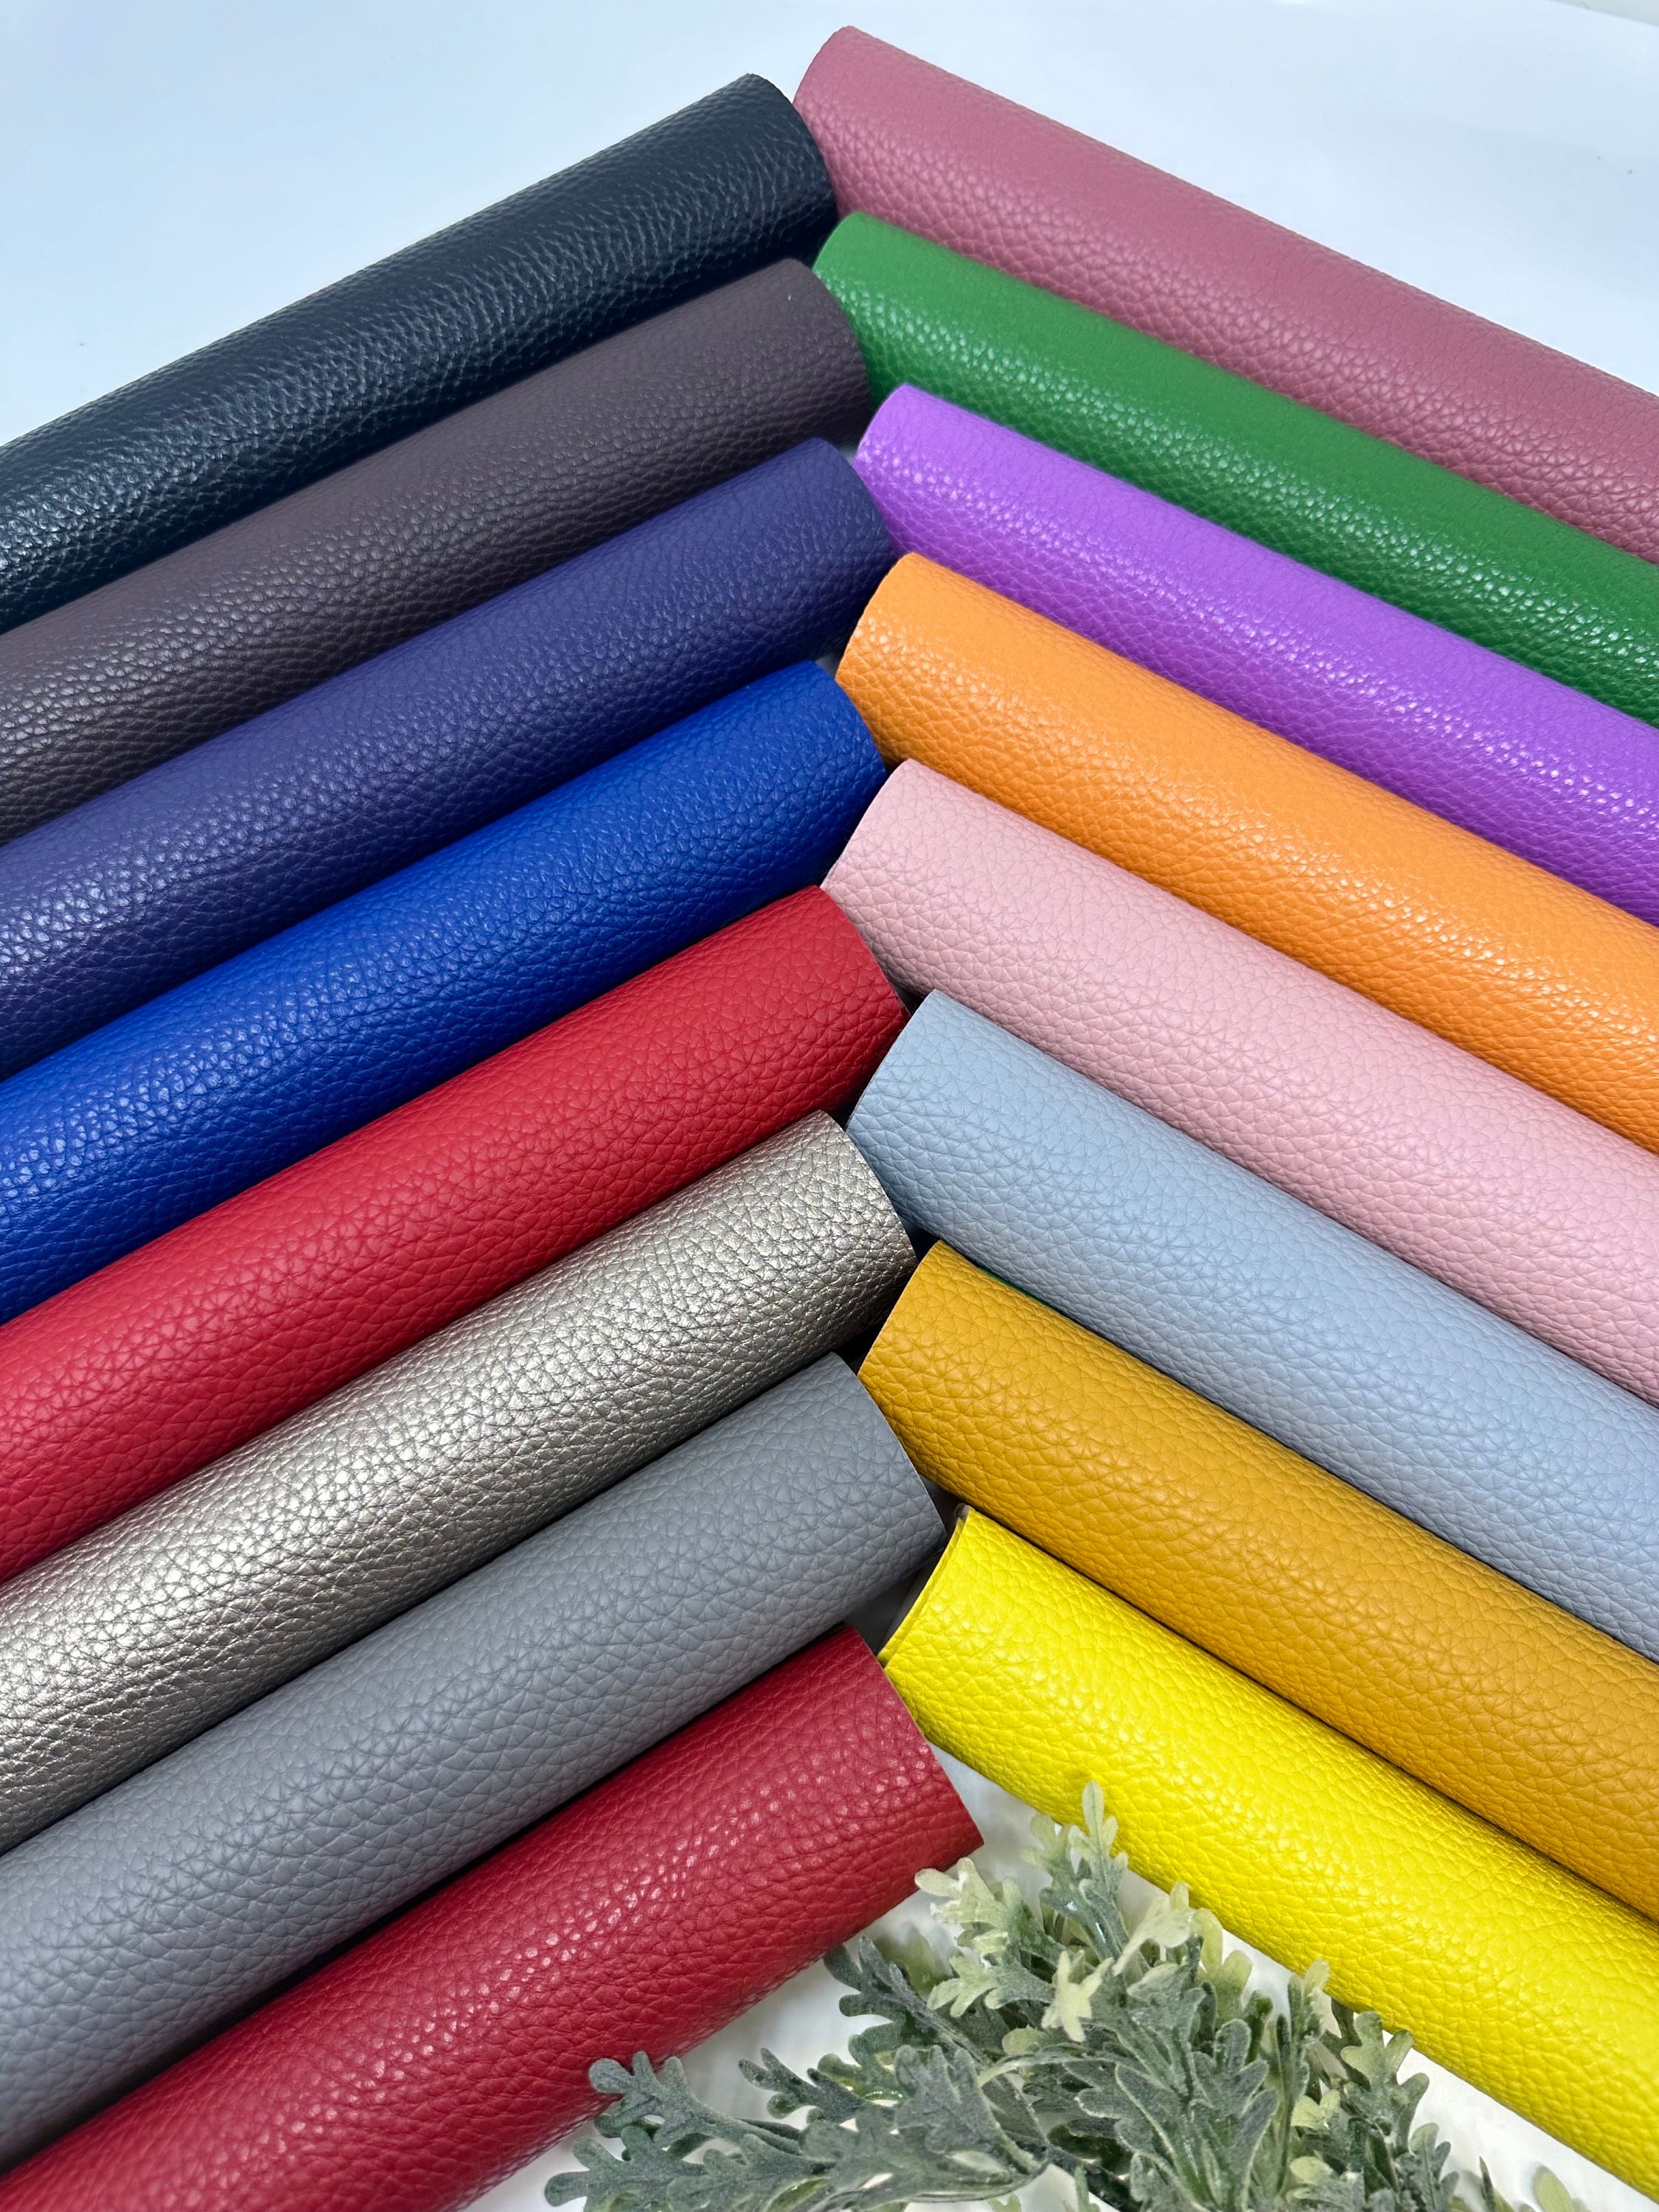 F6680 Texture Faux Leather Sheets. Texture Leather Sheet. Craft Supplies.  Leather Hair Bows Supplies. Faux Leather 